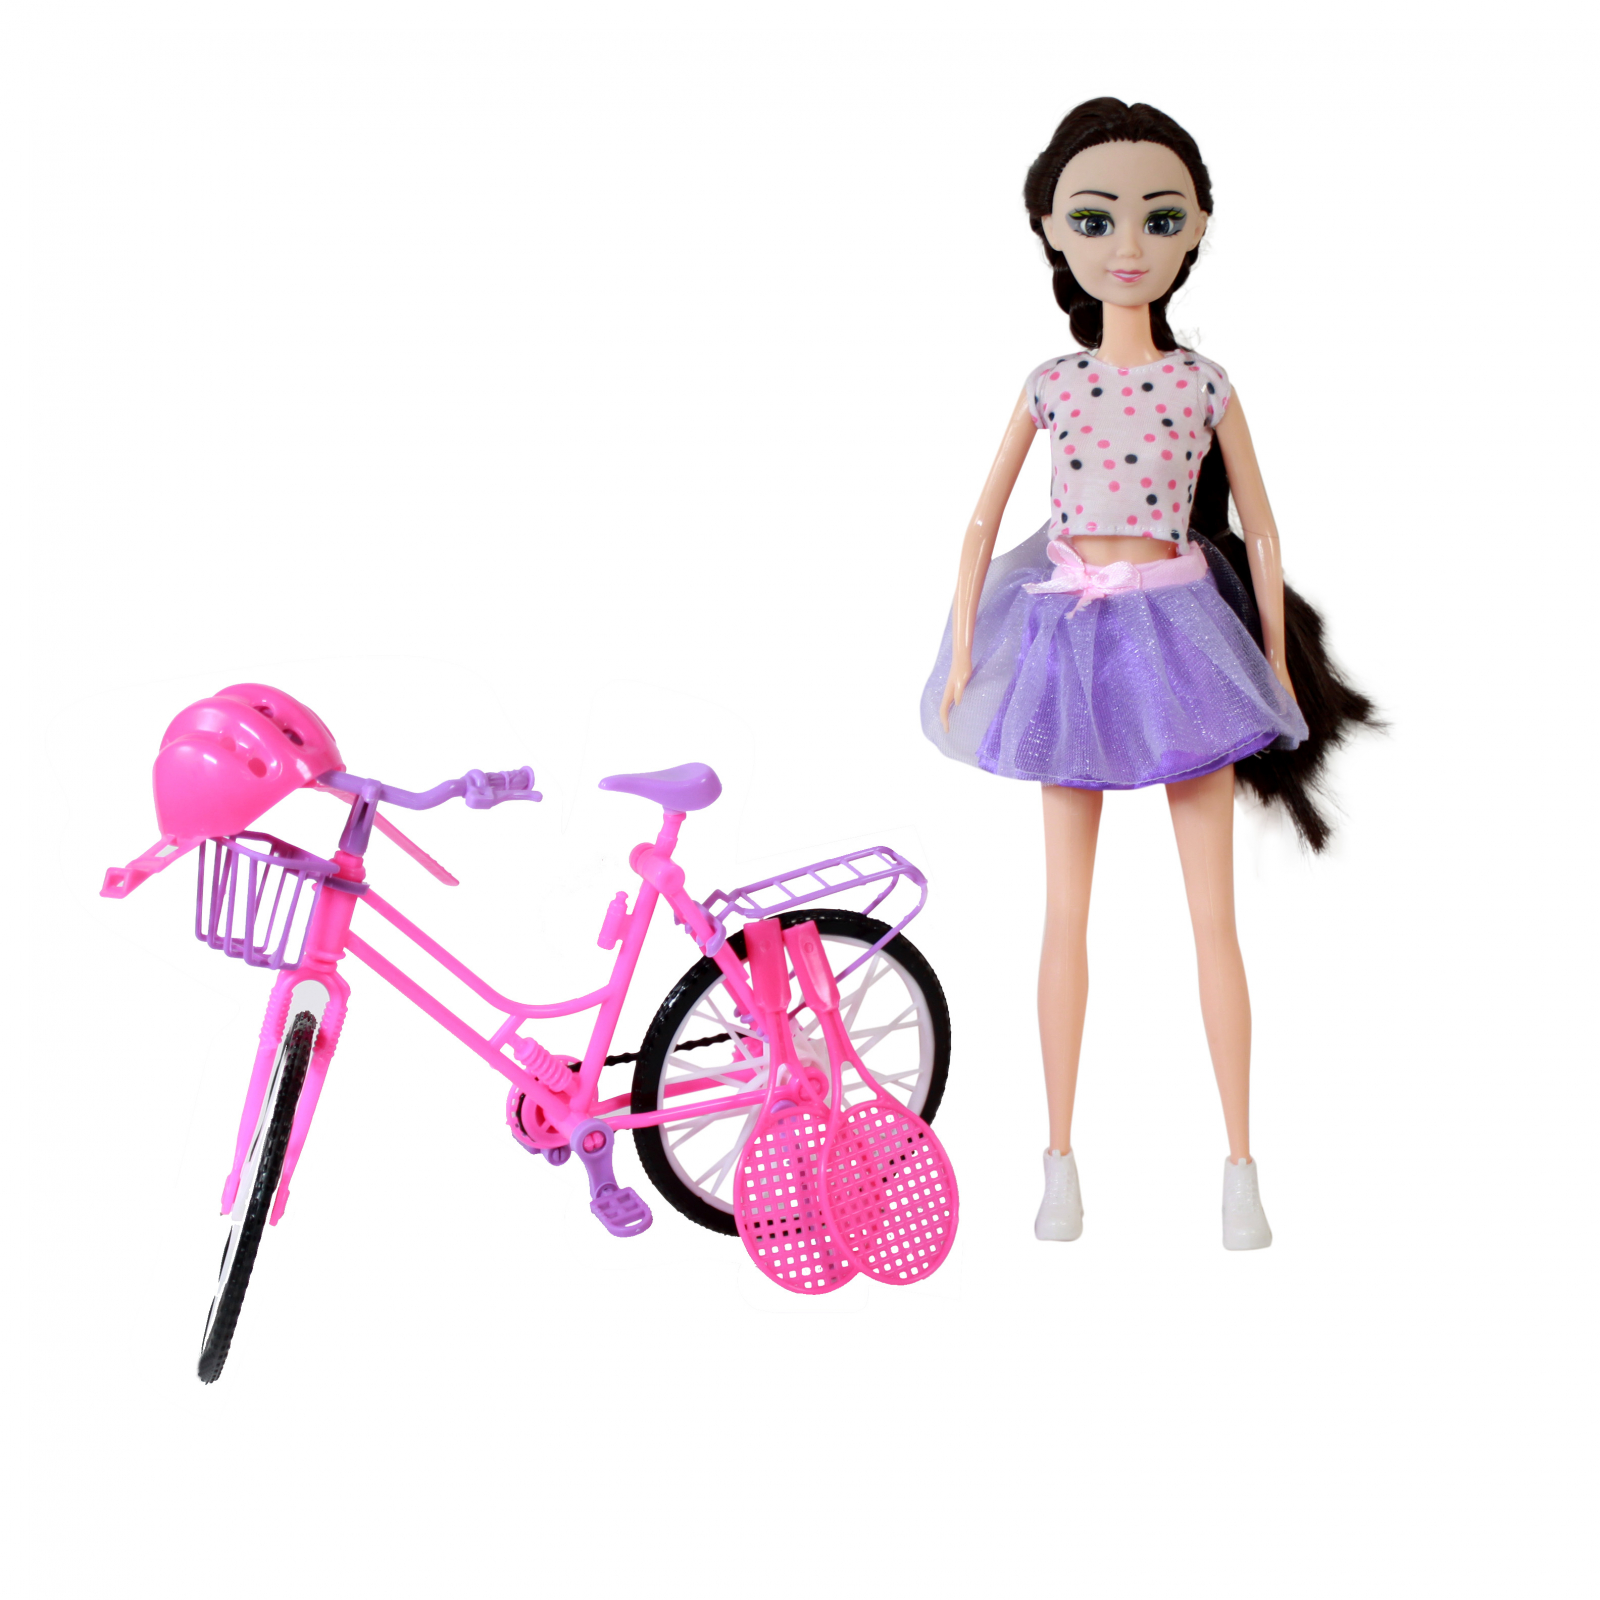 TychoTyke Blonde Fashion Doll Playset With Blue Pink Bike And Sports Equipment Tennis Rackets - Purple